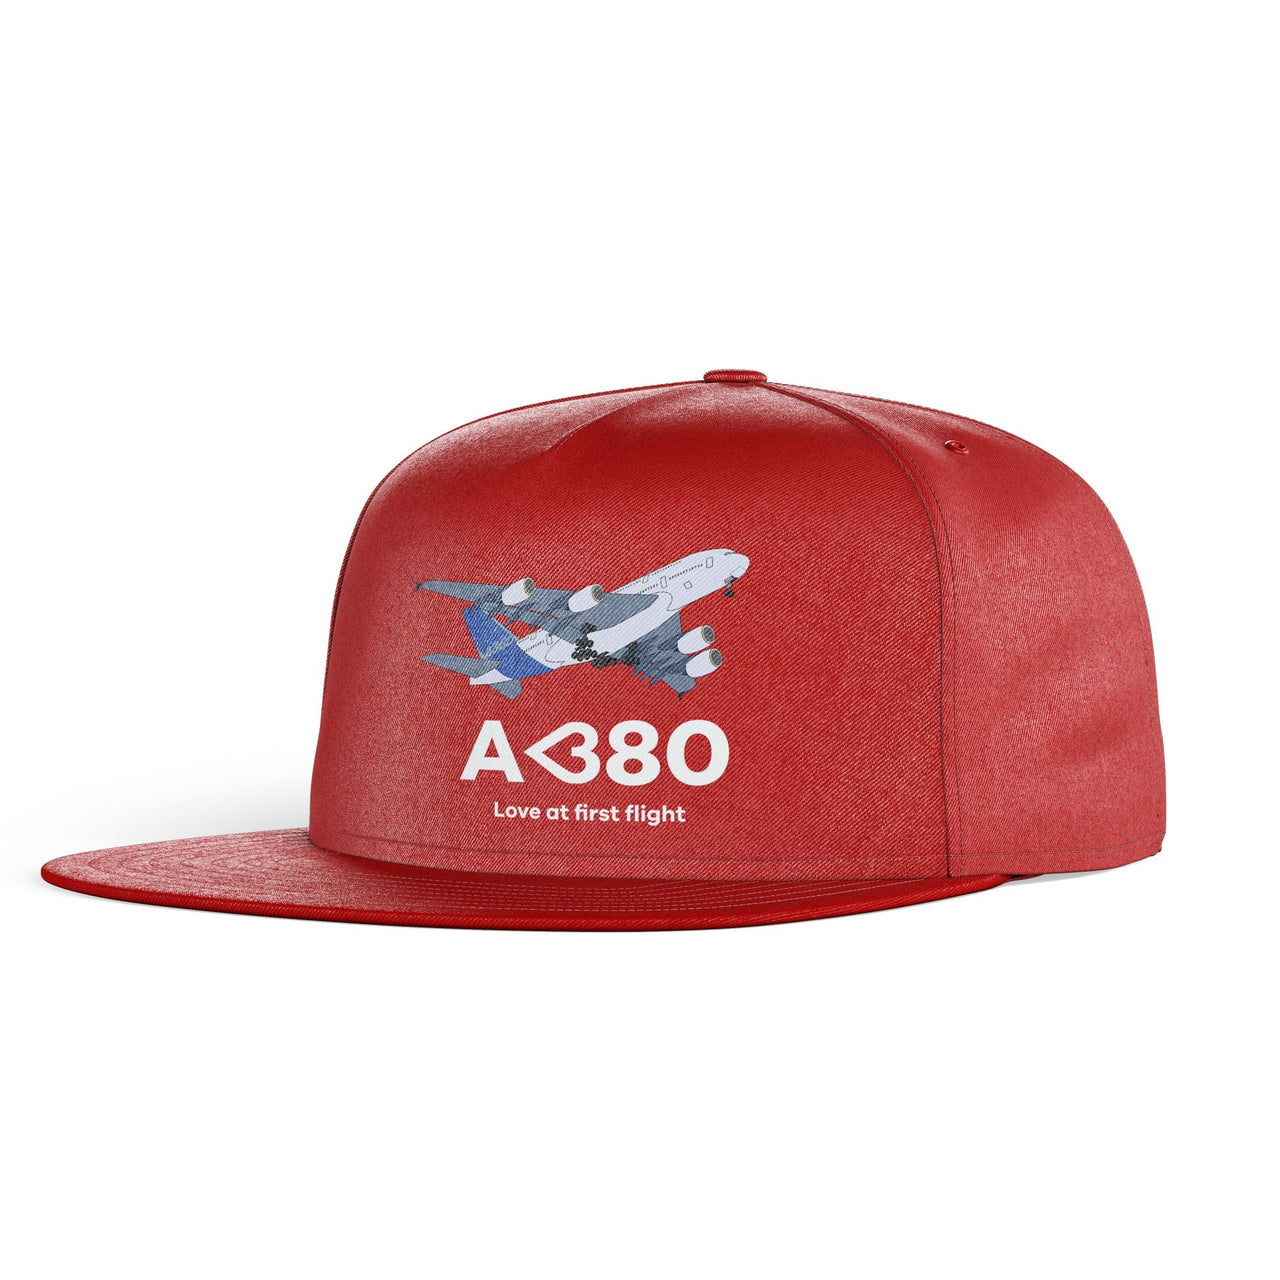 Airbus A380 Love at first flight Designed Snapback Caps & Hats